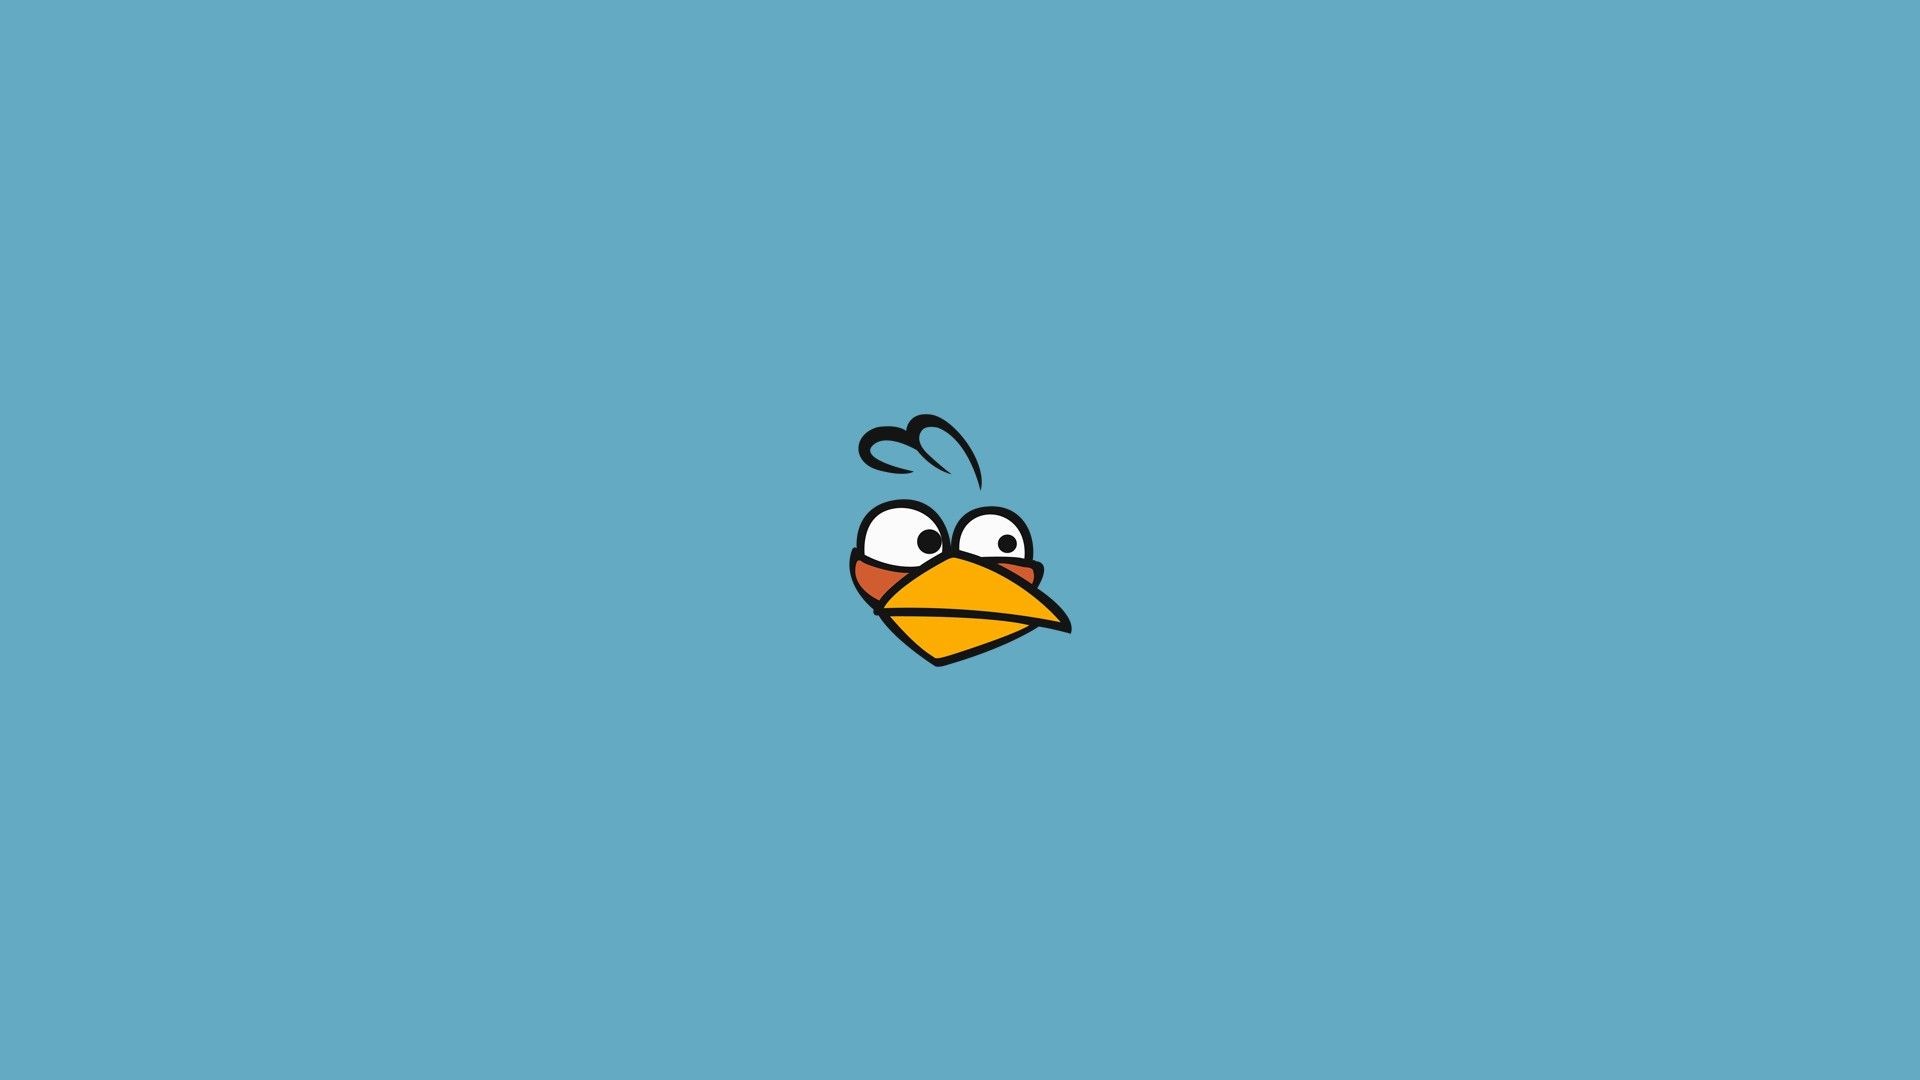 General 1920x1080 Angry Birds minimalism cartoon simple background blue background blue video games